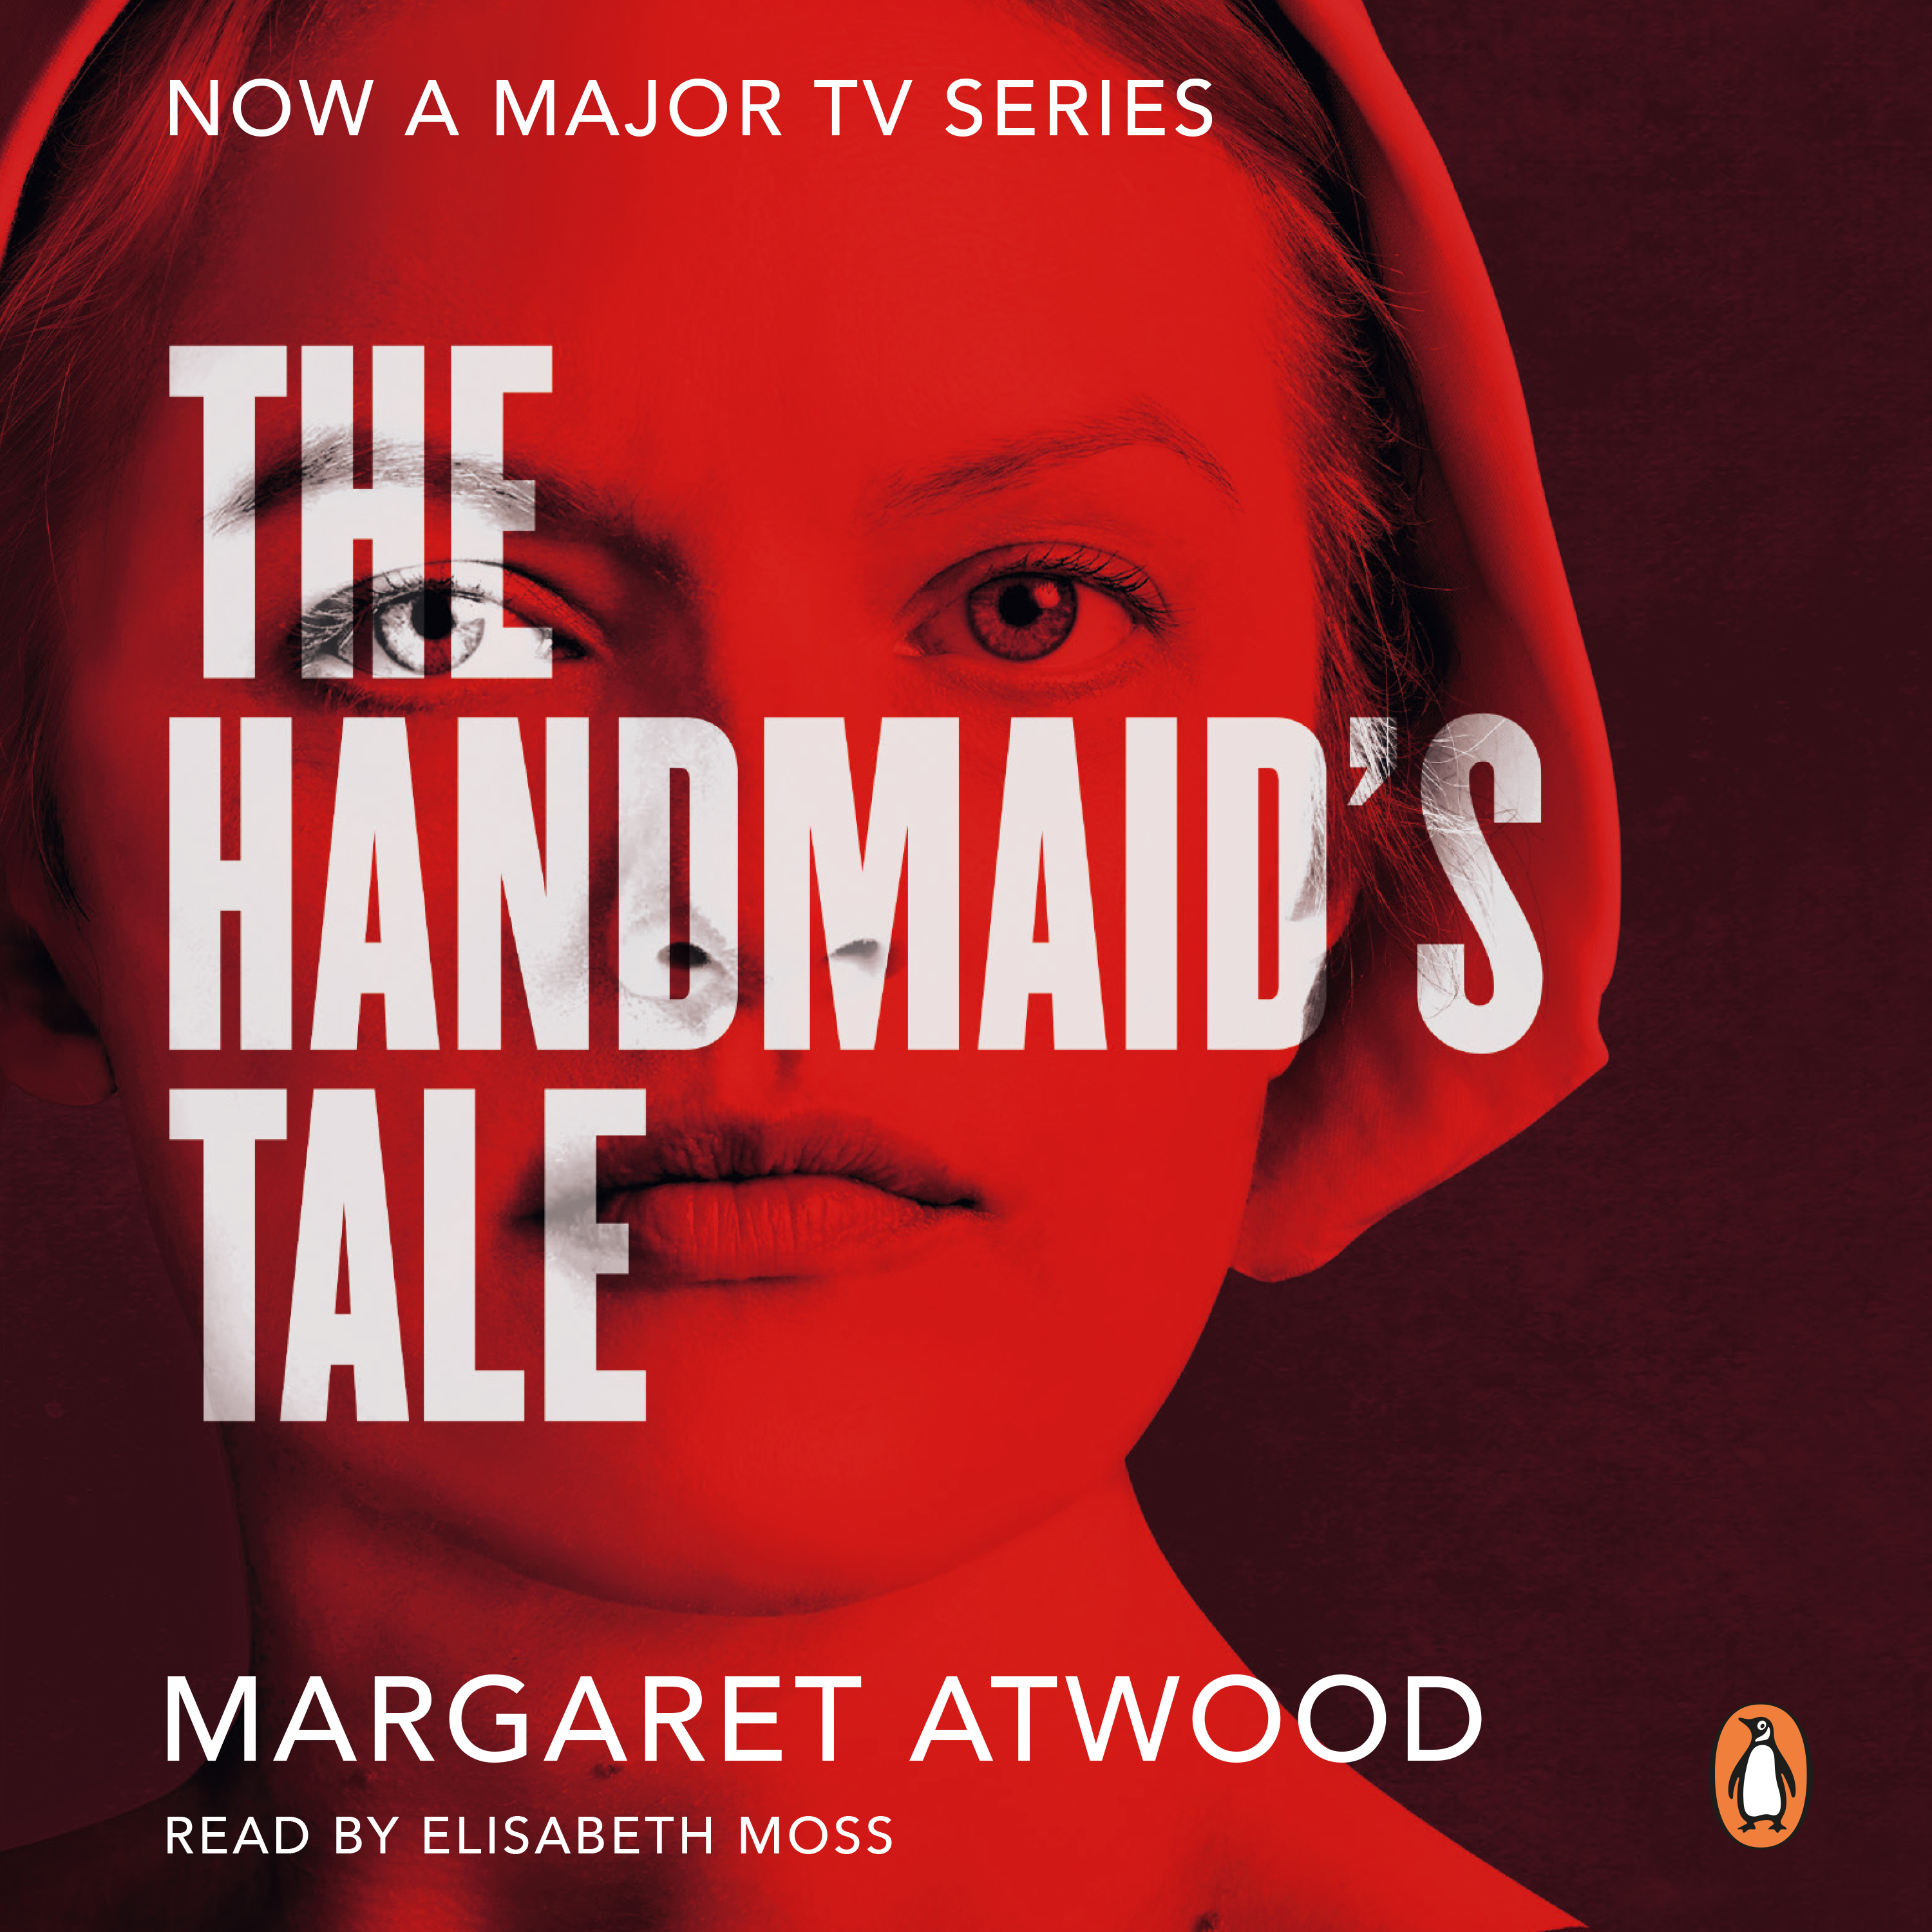 A dark red cover with a picture of Elisabeth Moss playing the character of Offred taking up the image. "The Handmaid's Tale in large white font across the middle with Maragret Atwood's name in white at the bottom.